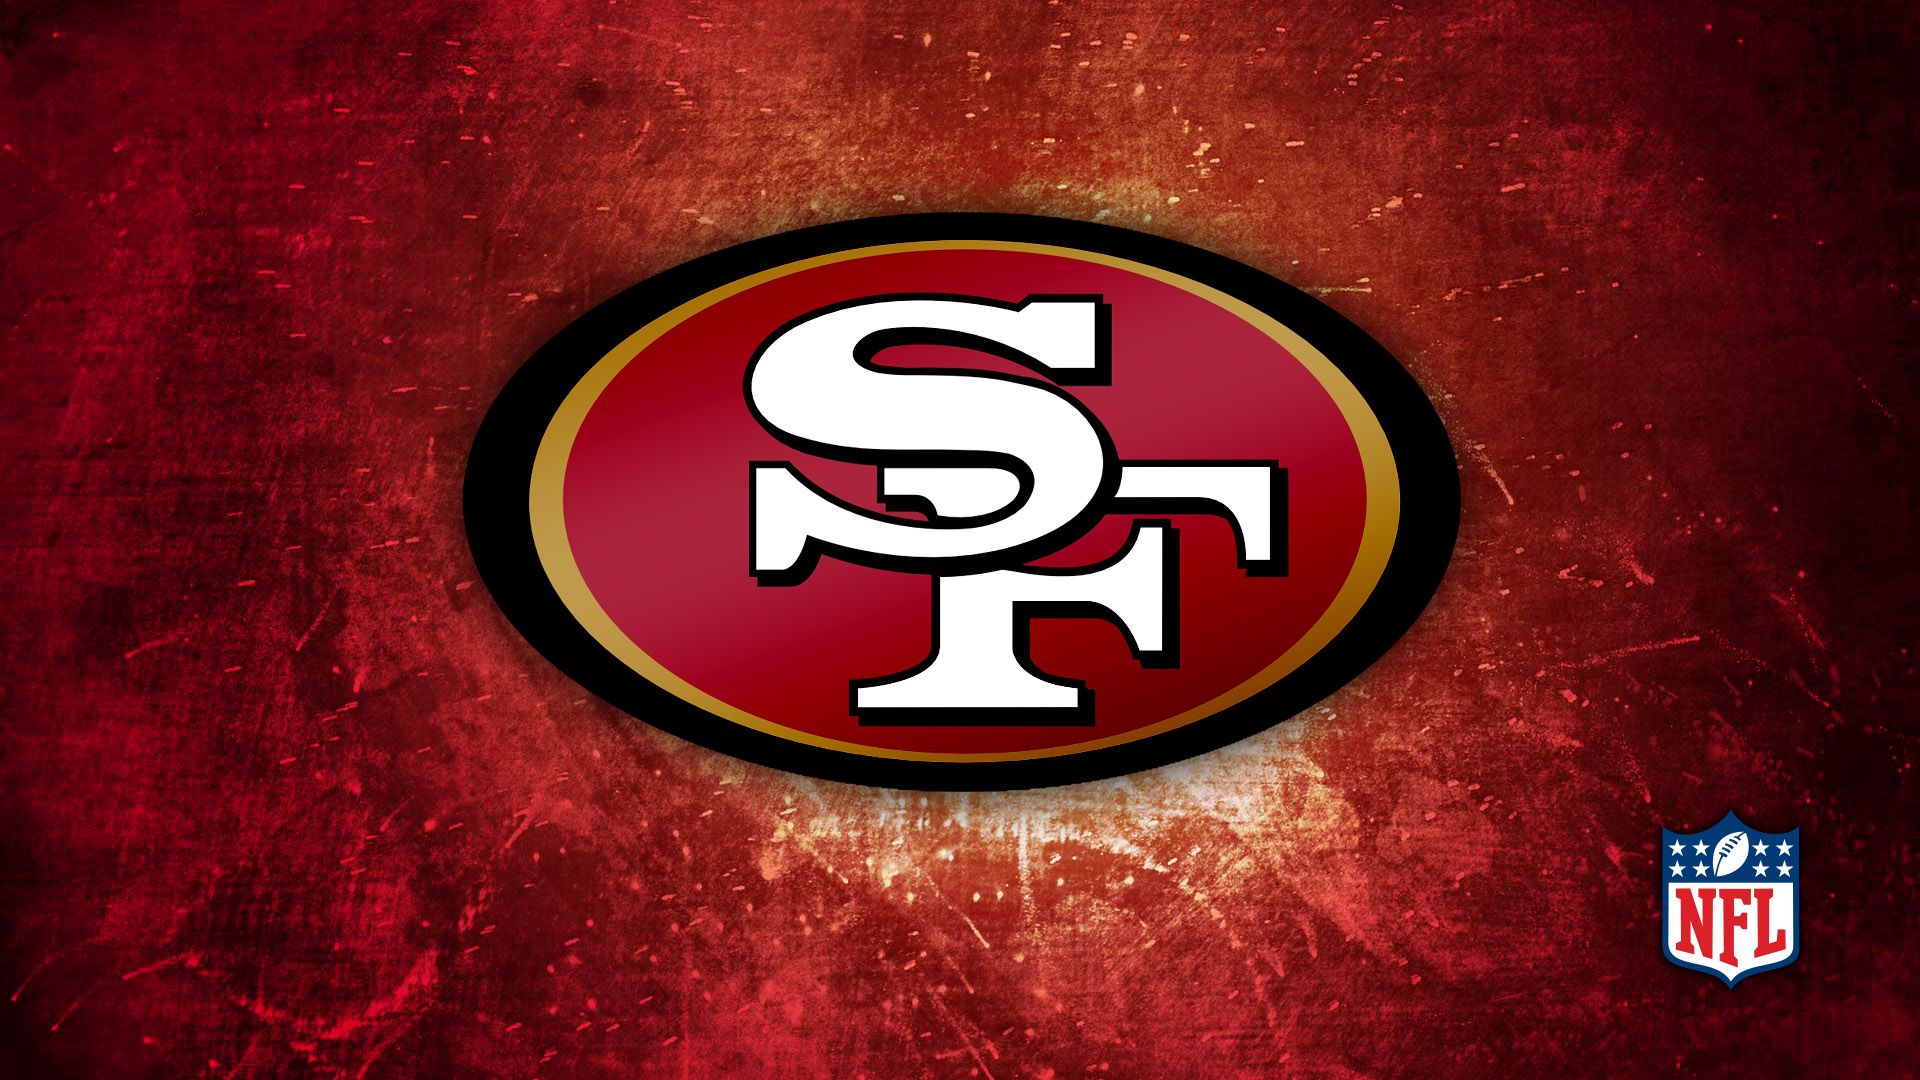 49ers logos pictures | cute Wallpapers